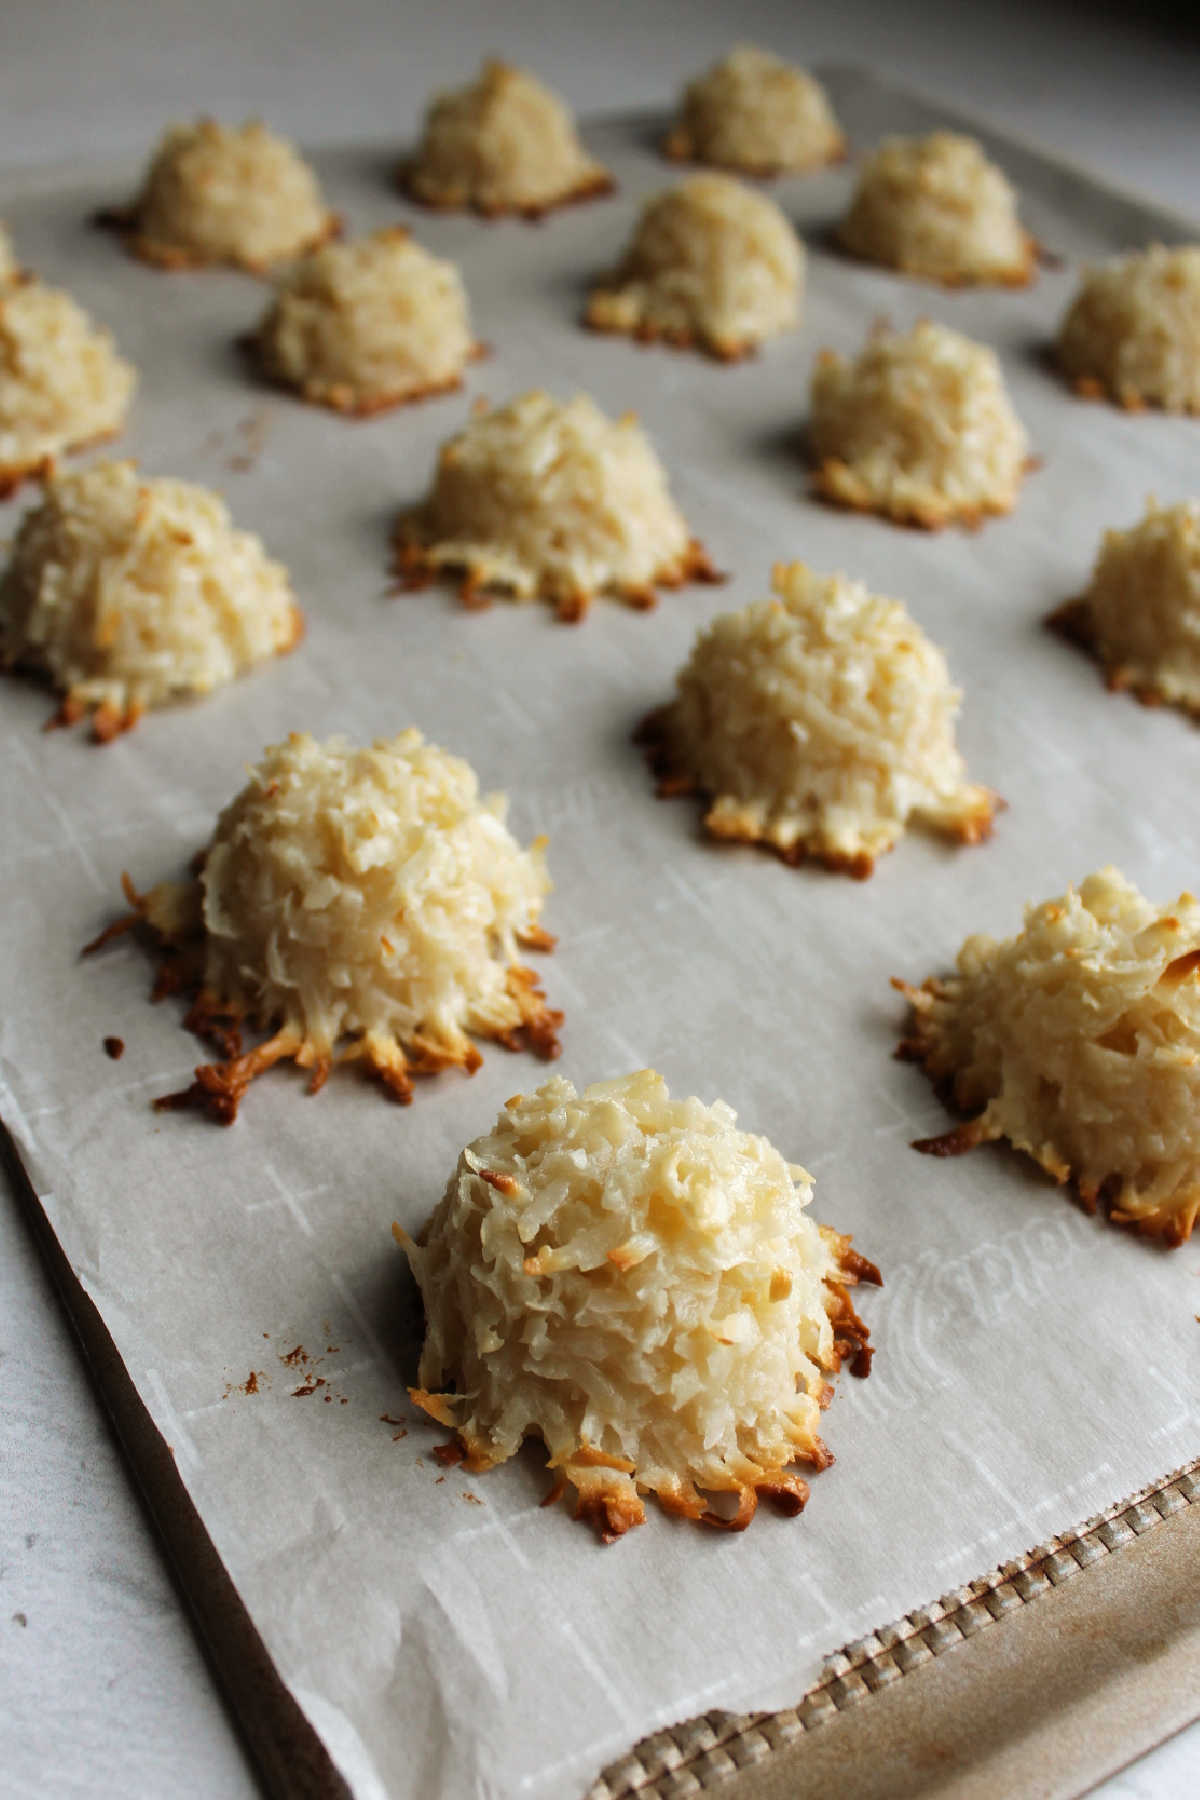 Golden brown coconut macaroons on parchment lined cookie tray fresh from the oven.